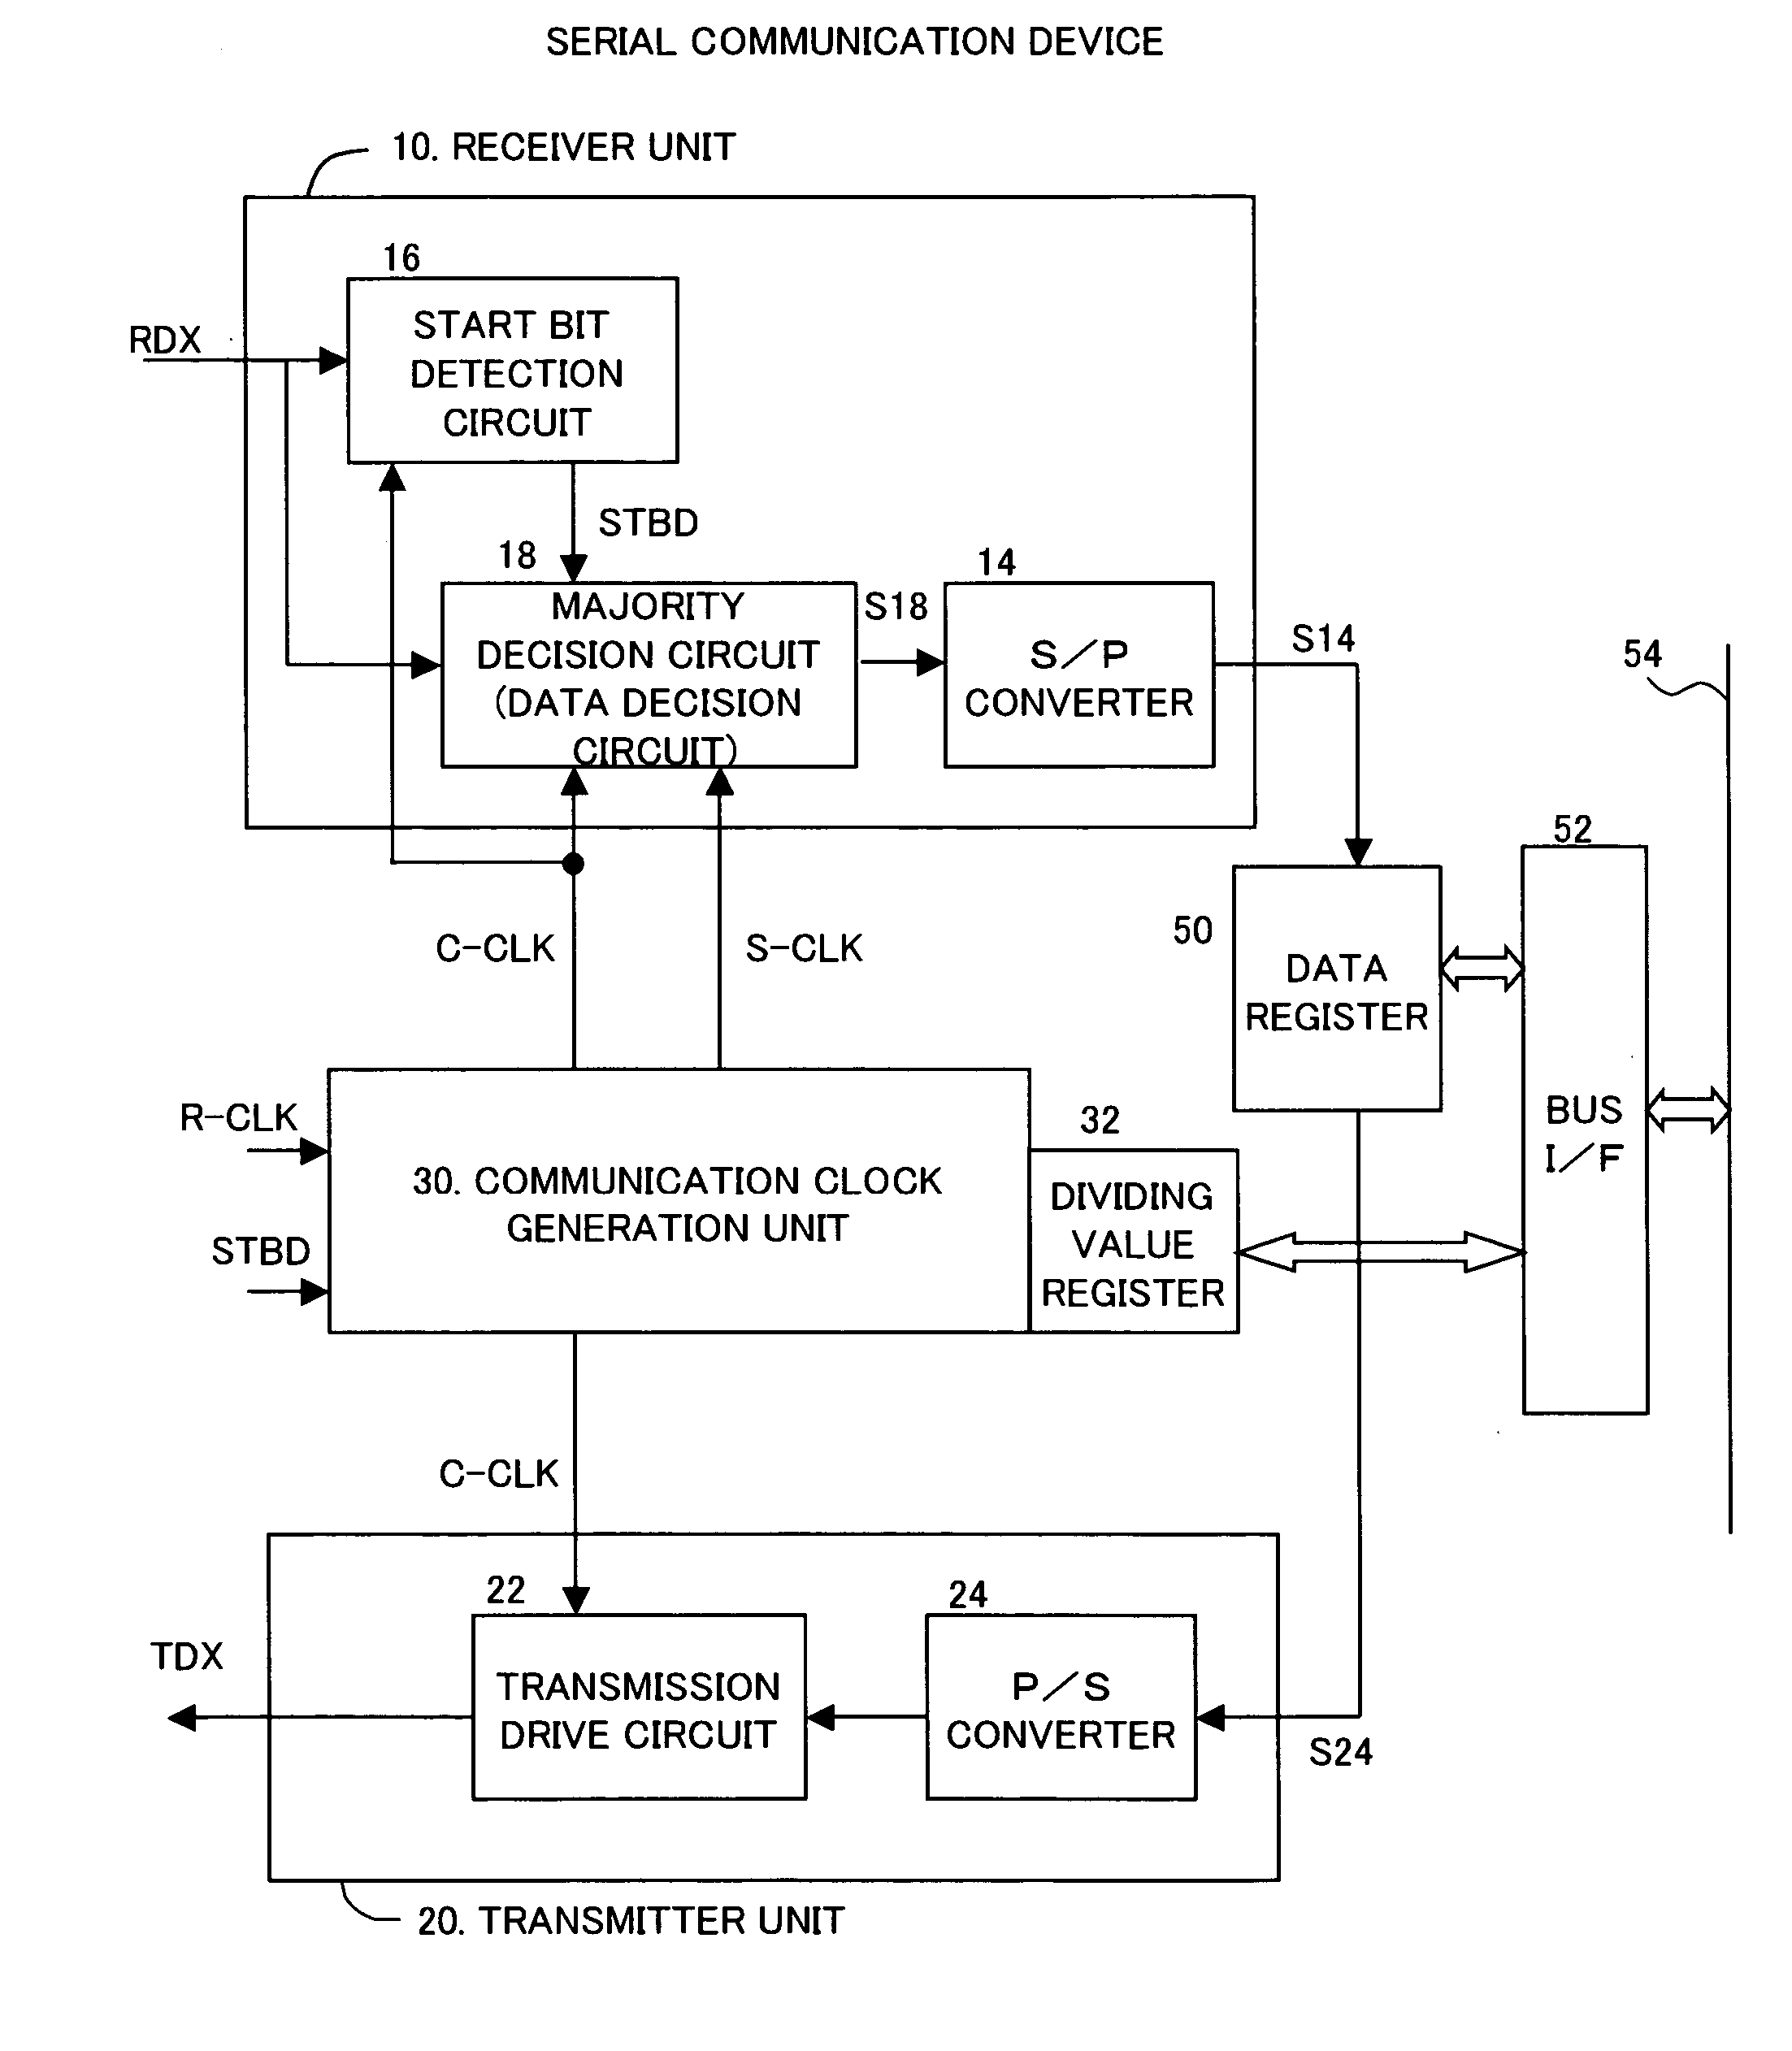 Serial communication device